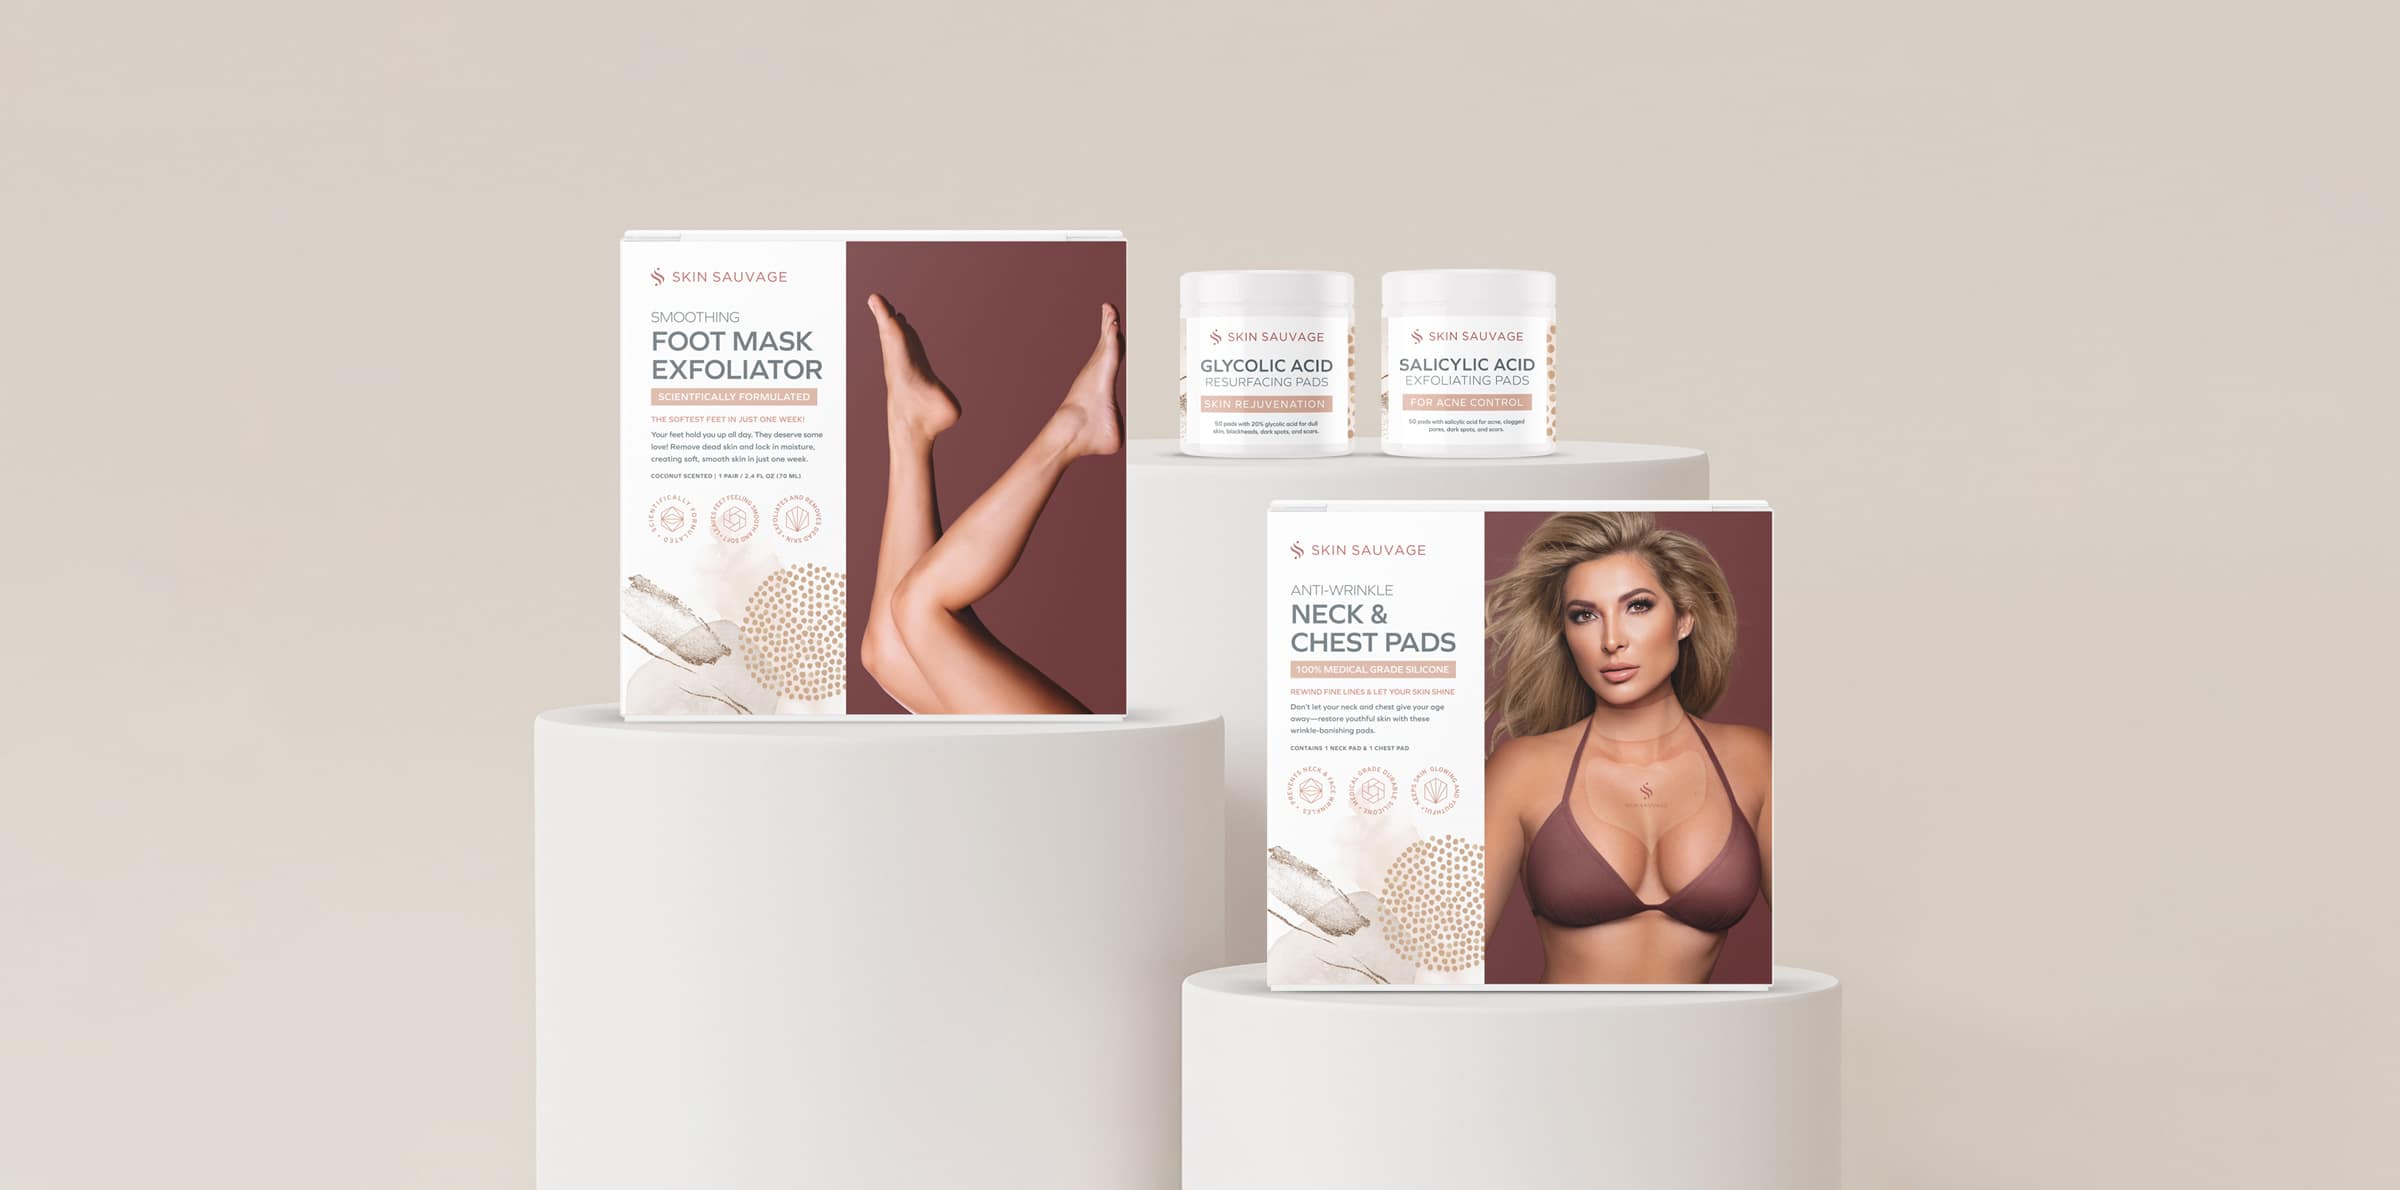 Skin Sauvage skin care packaging minimalist and displayed on three cream colored platforms.